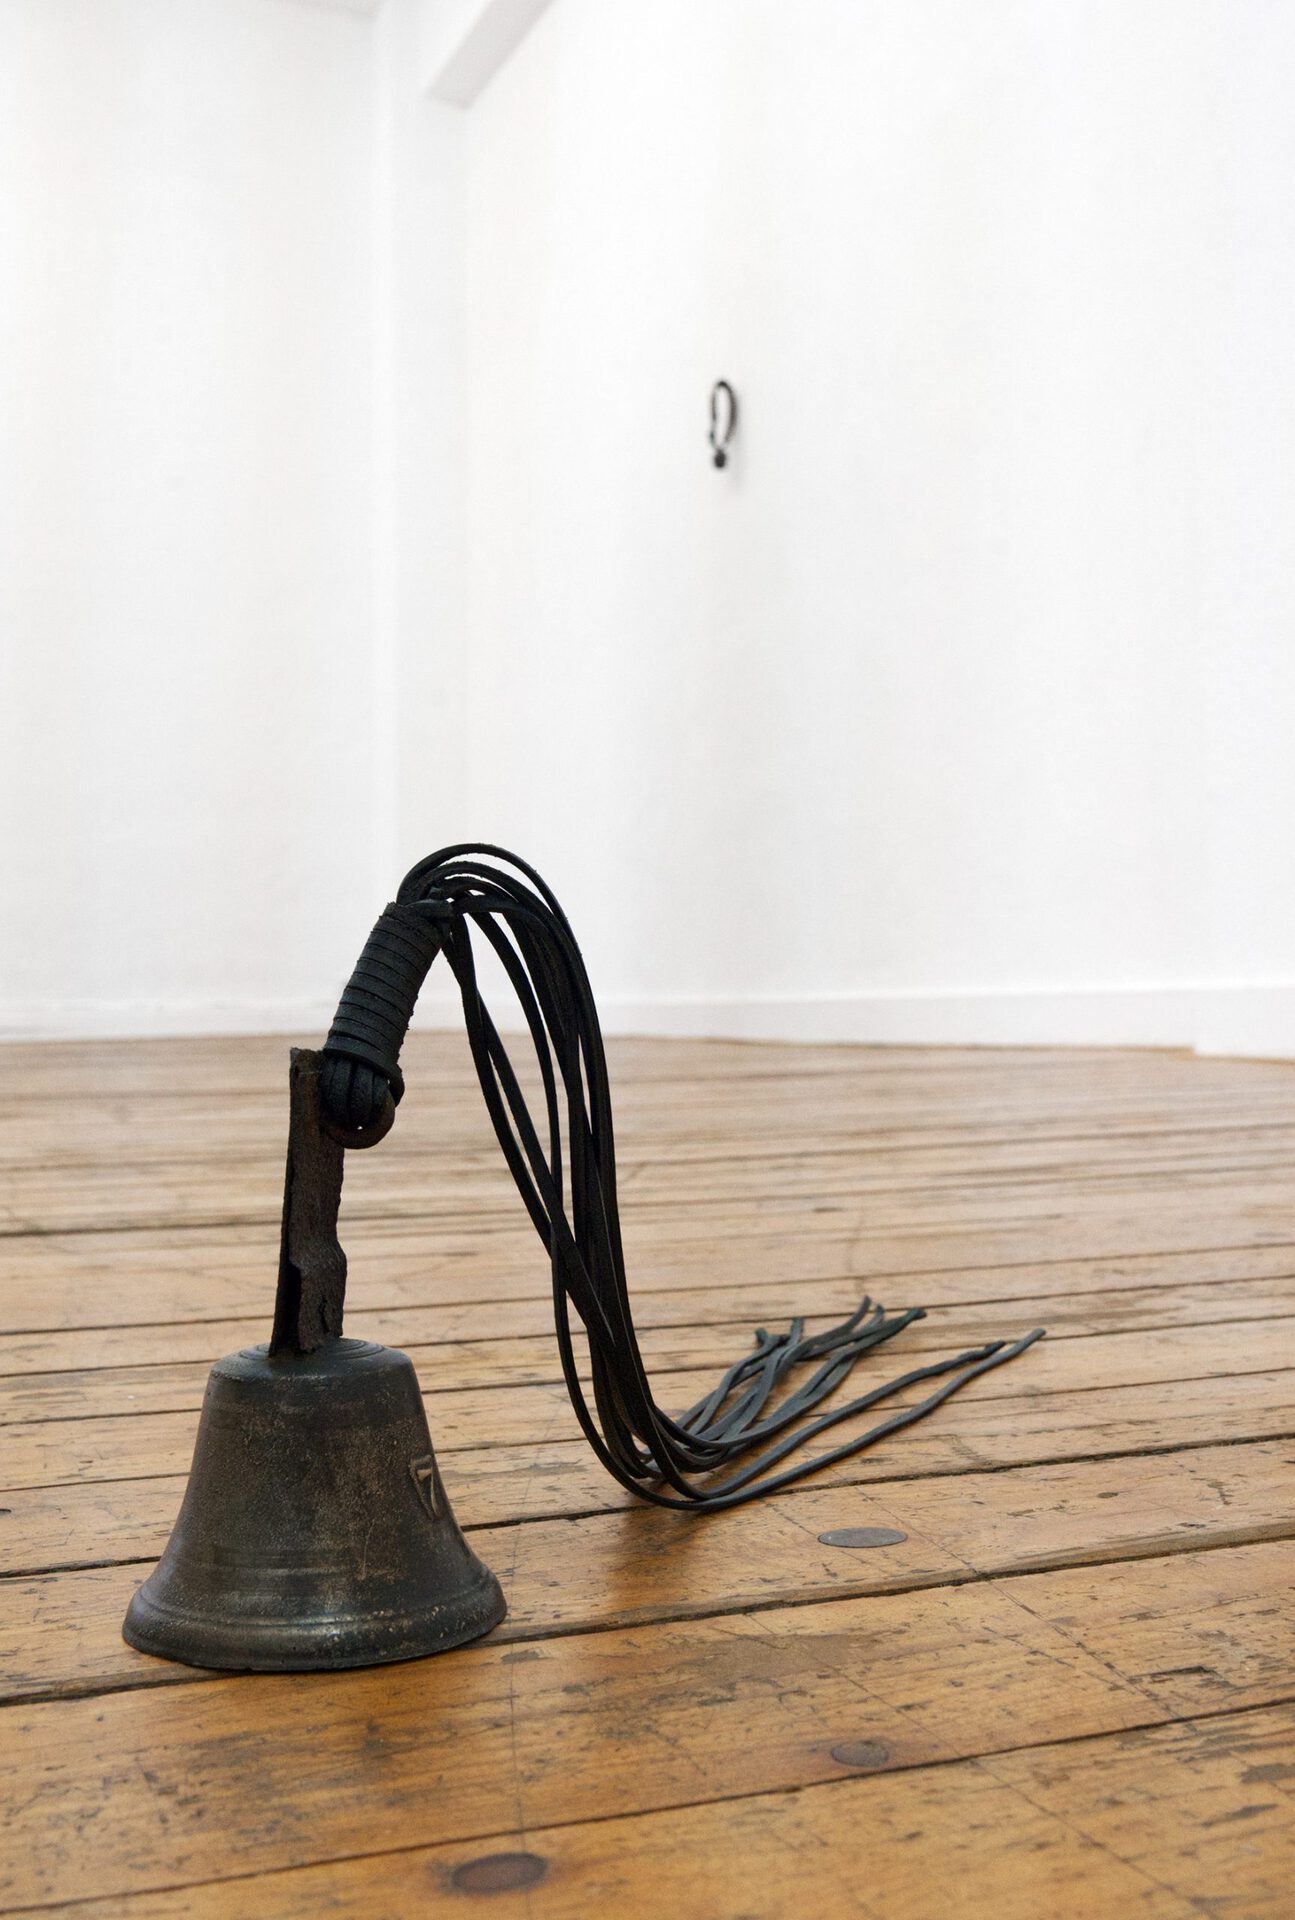 Eliza Ballesteros, DOMESTIC HECK IV, 2020, antique bell with laces, brass, iron, leather, 20 x 55 x 14 cm